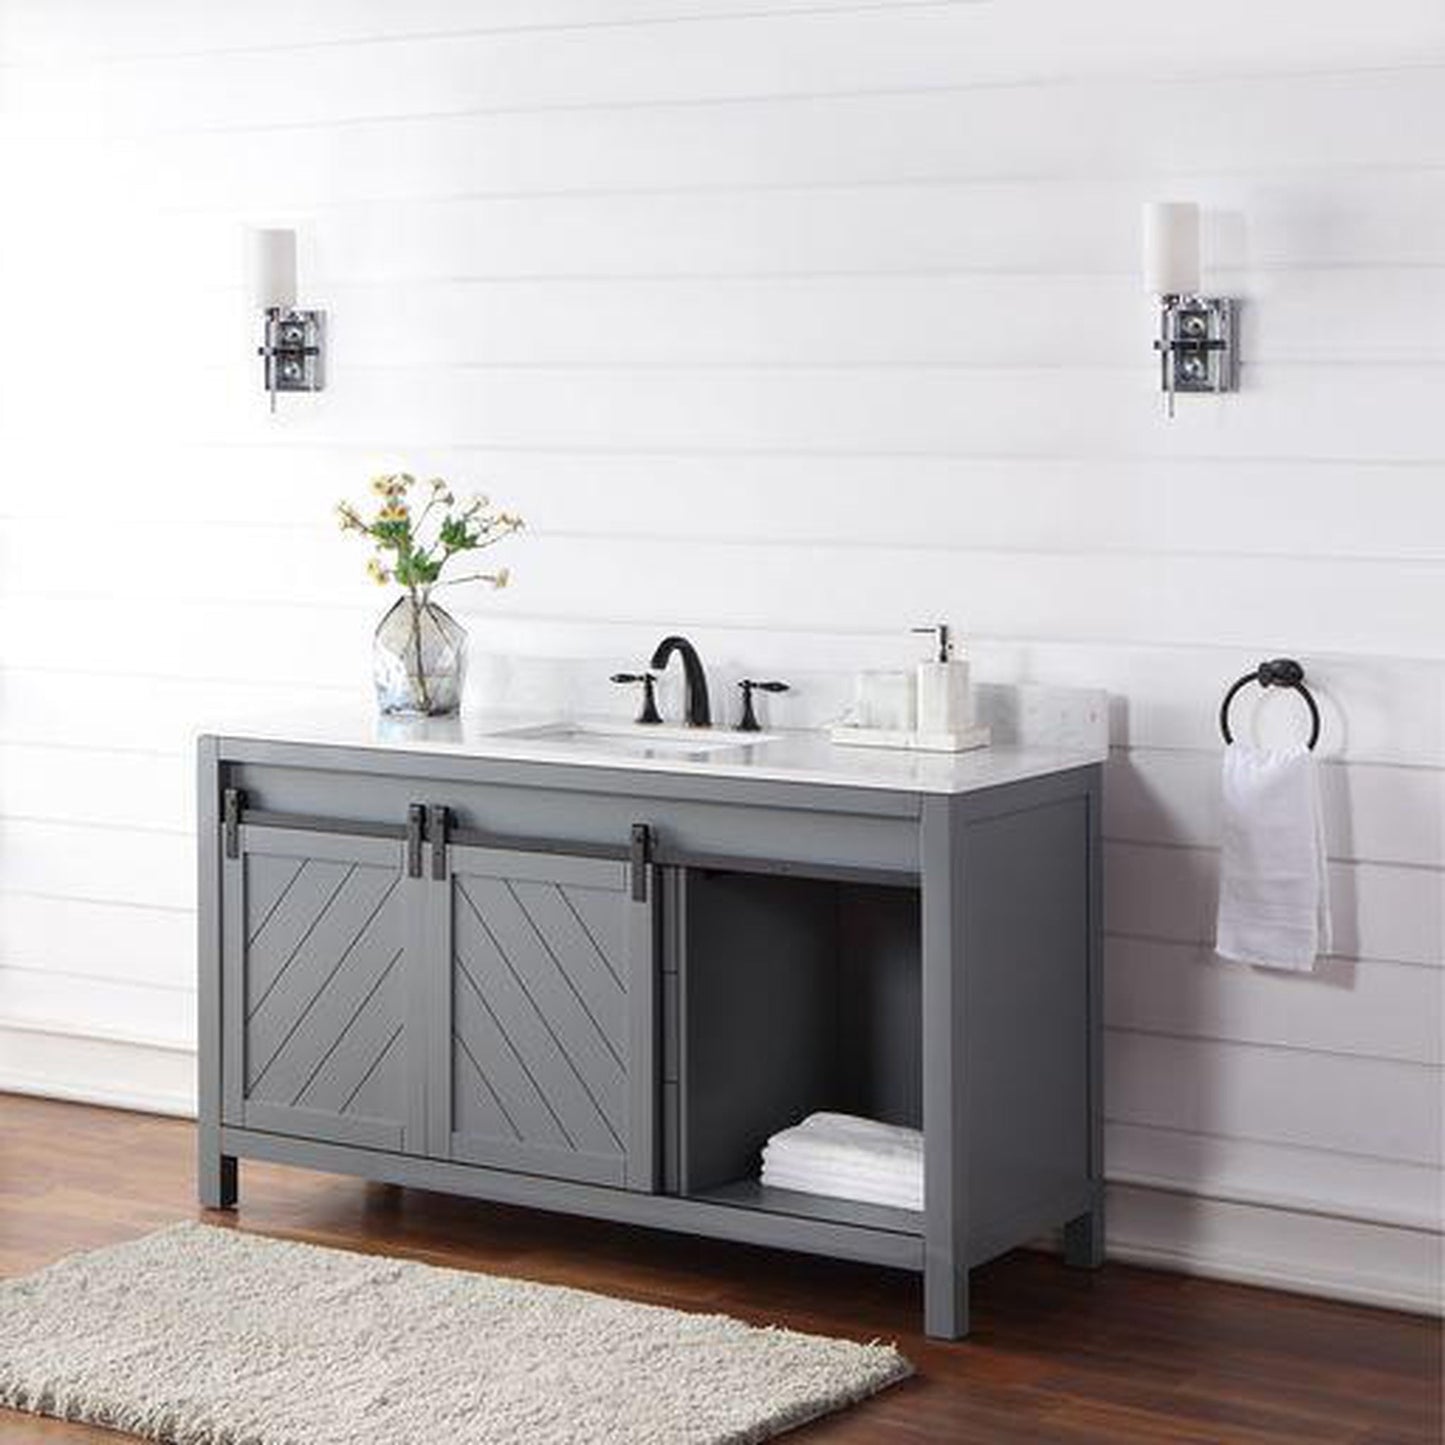 Altair Kinsley 60" Single Gray Freestanding Bathroom Vanity Set With Aosta White Composite Stone Top, Rectangular Undermount Ceramic Sink, and Overflow